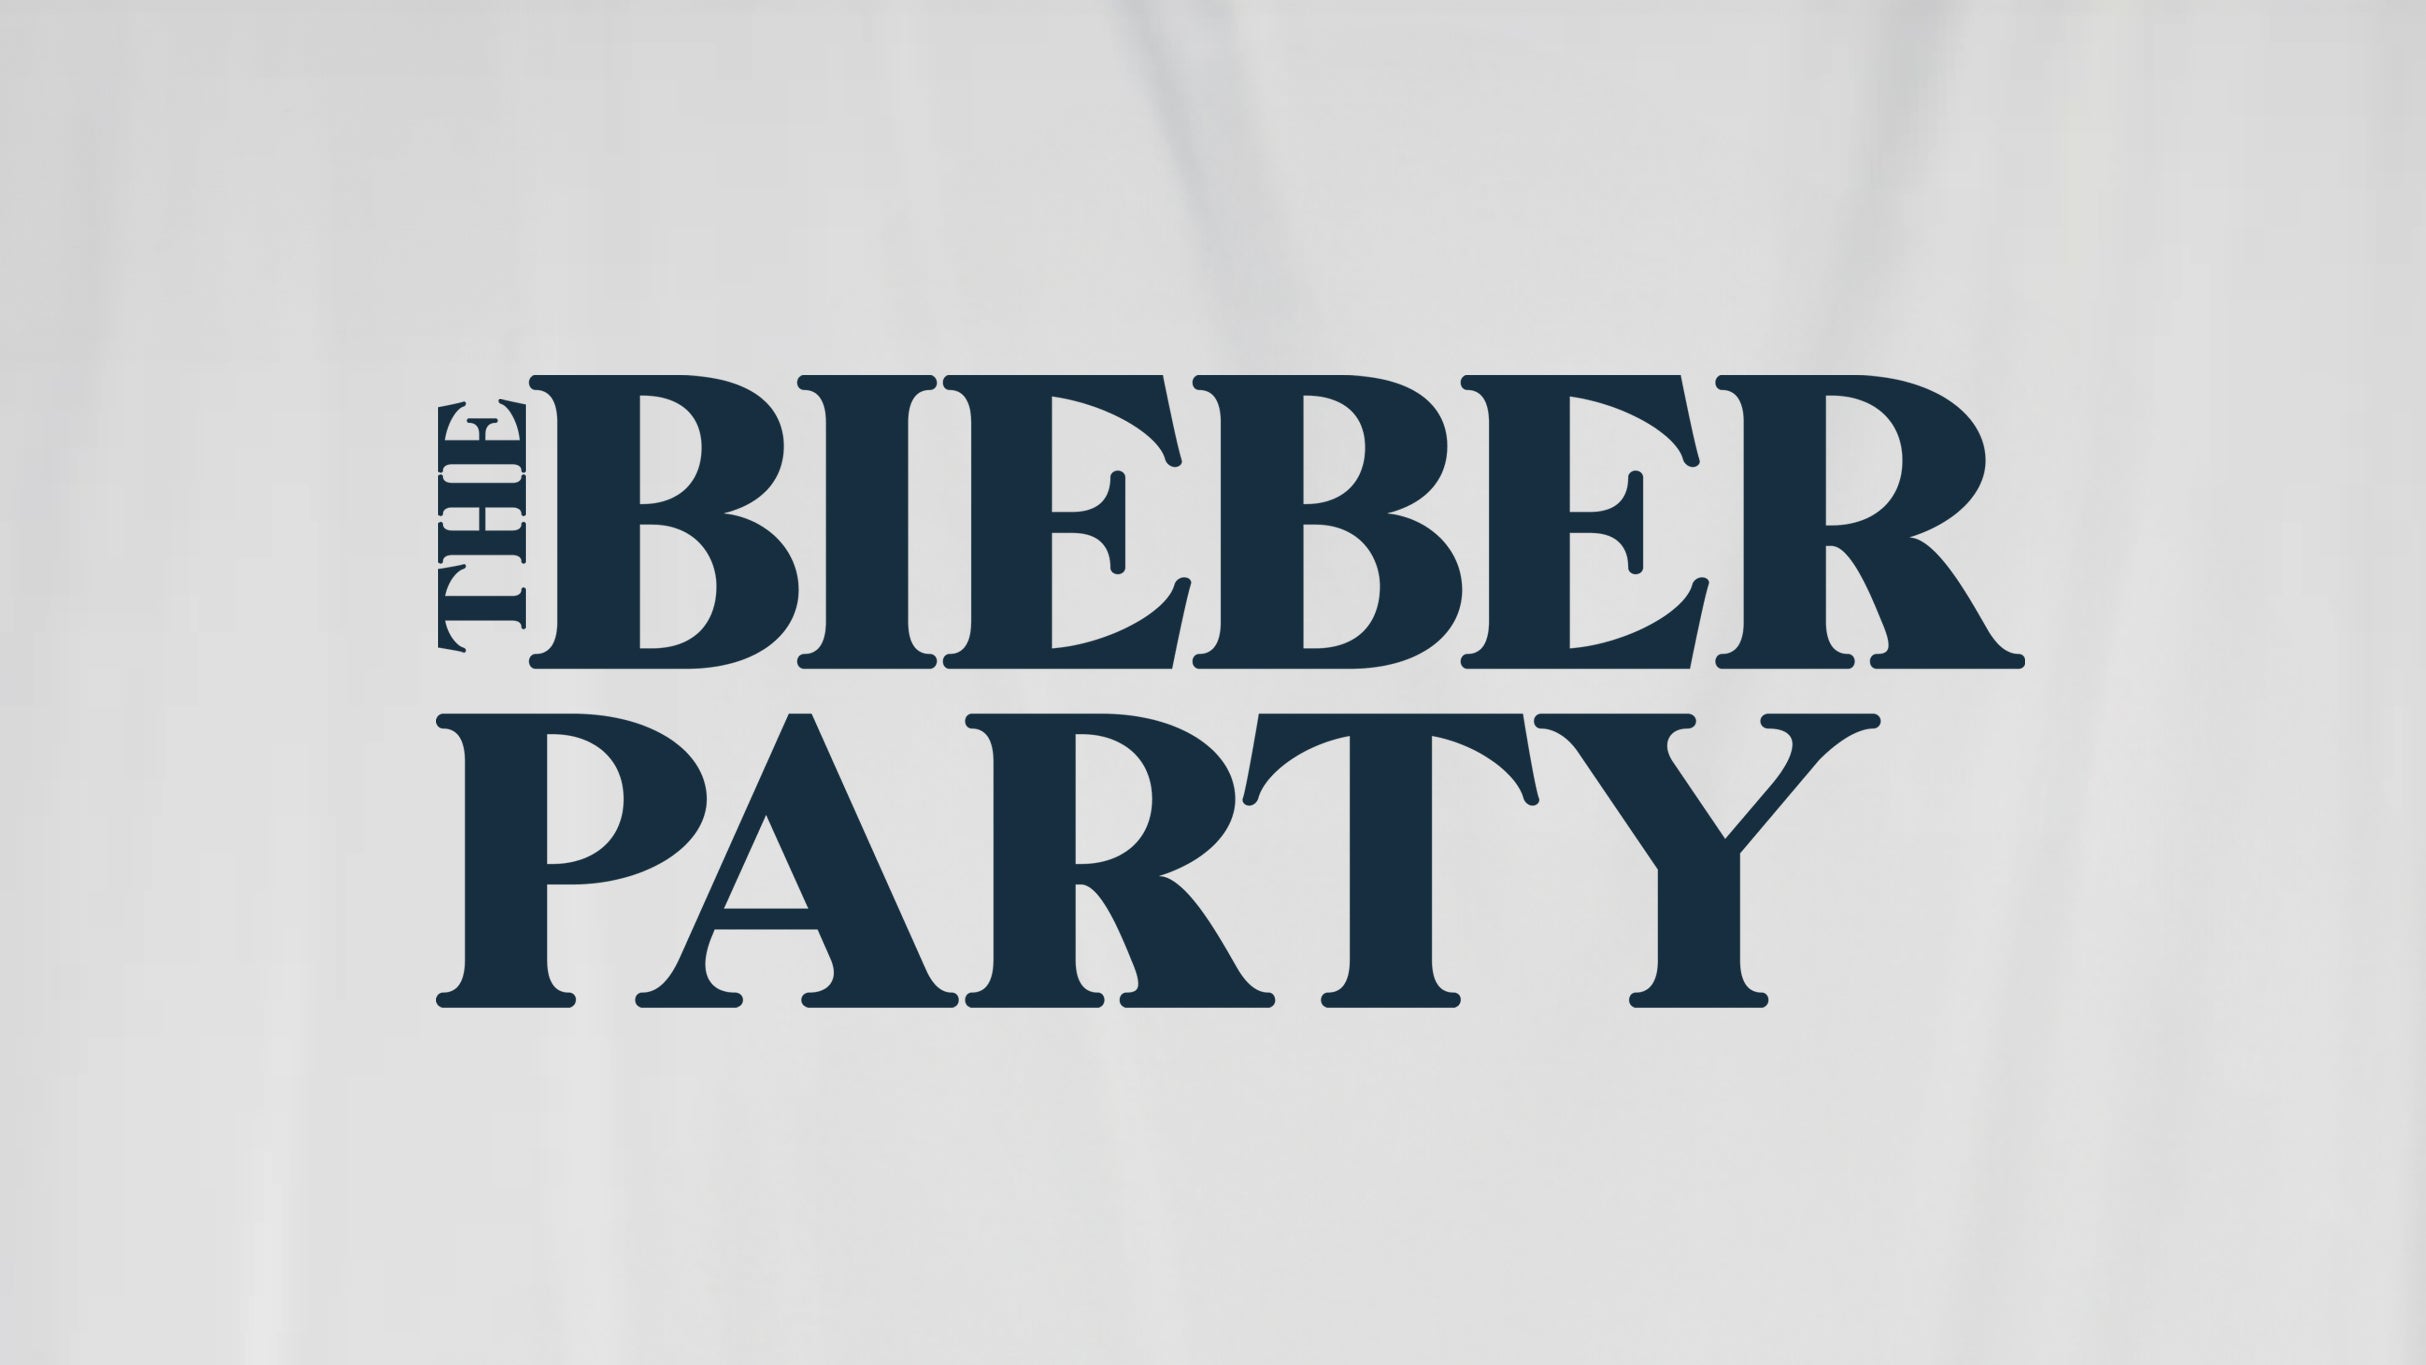 The Bieber Party: Justin Bieber Night (18+) in Wilmington promo photo for Artist presale offer code